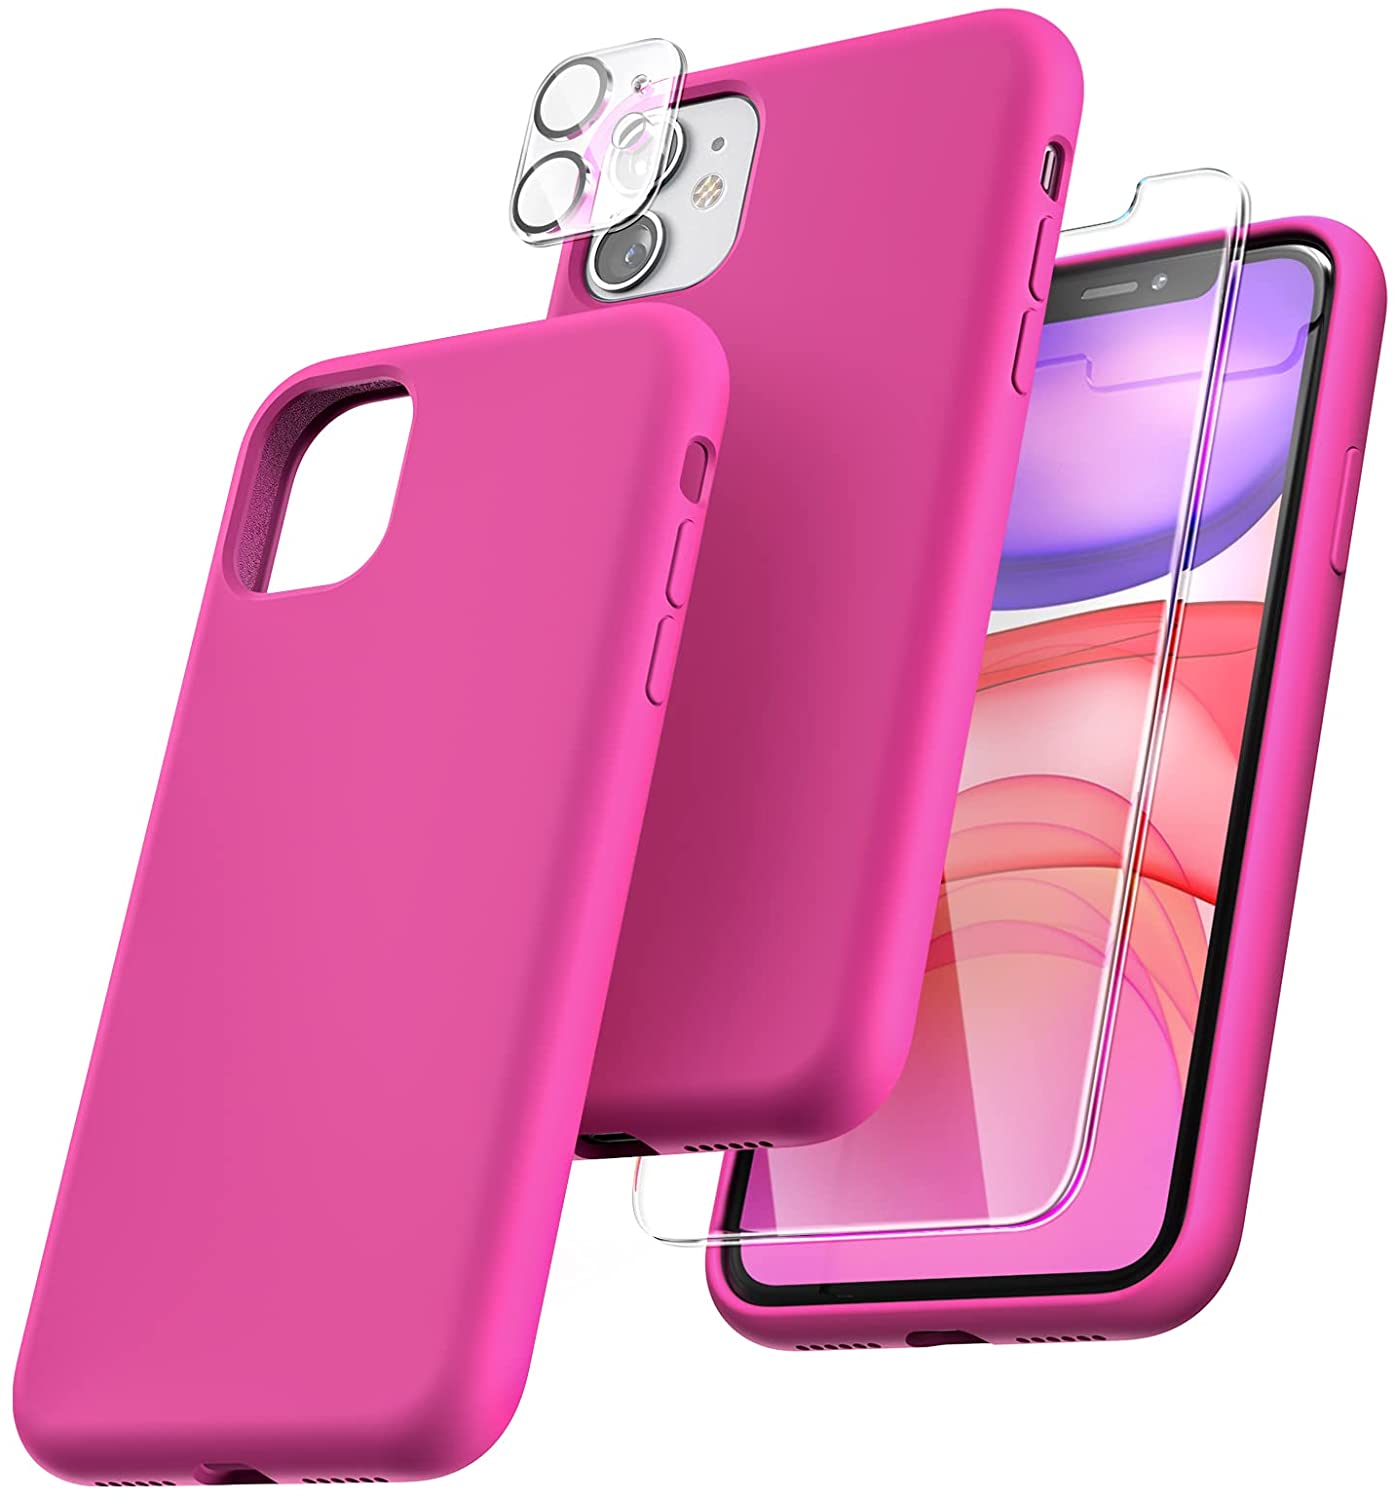 TOCOL [5 in 1] Designed for iPhone 11 Case, with 2 Pack Screen Protector + 2 Pack Camera Lens Protector, Liquid Silicone Slim Shockproof Cover [Anti-Scratch] [Drop Protection], Hot Pink